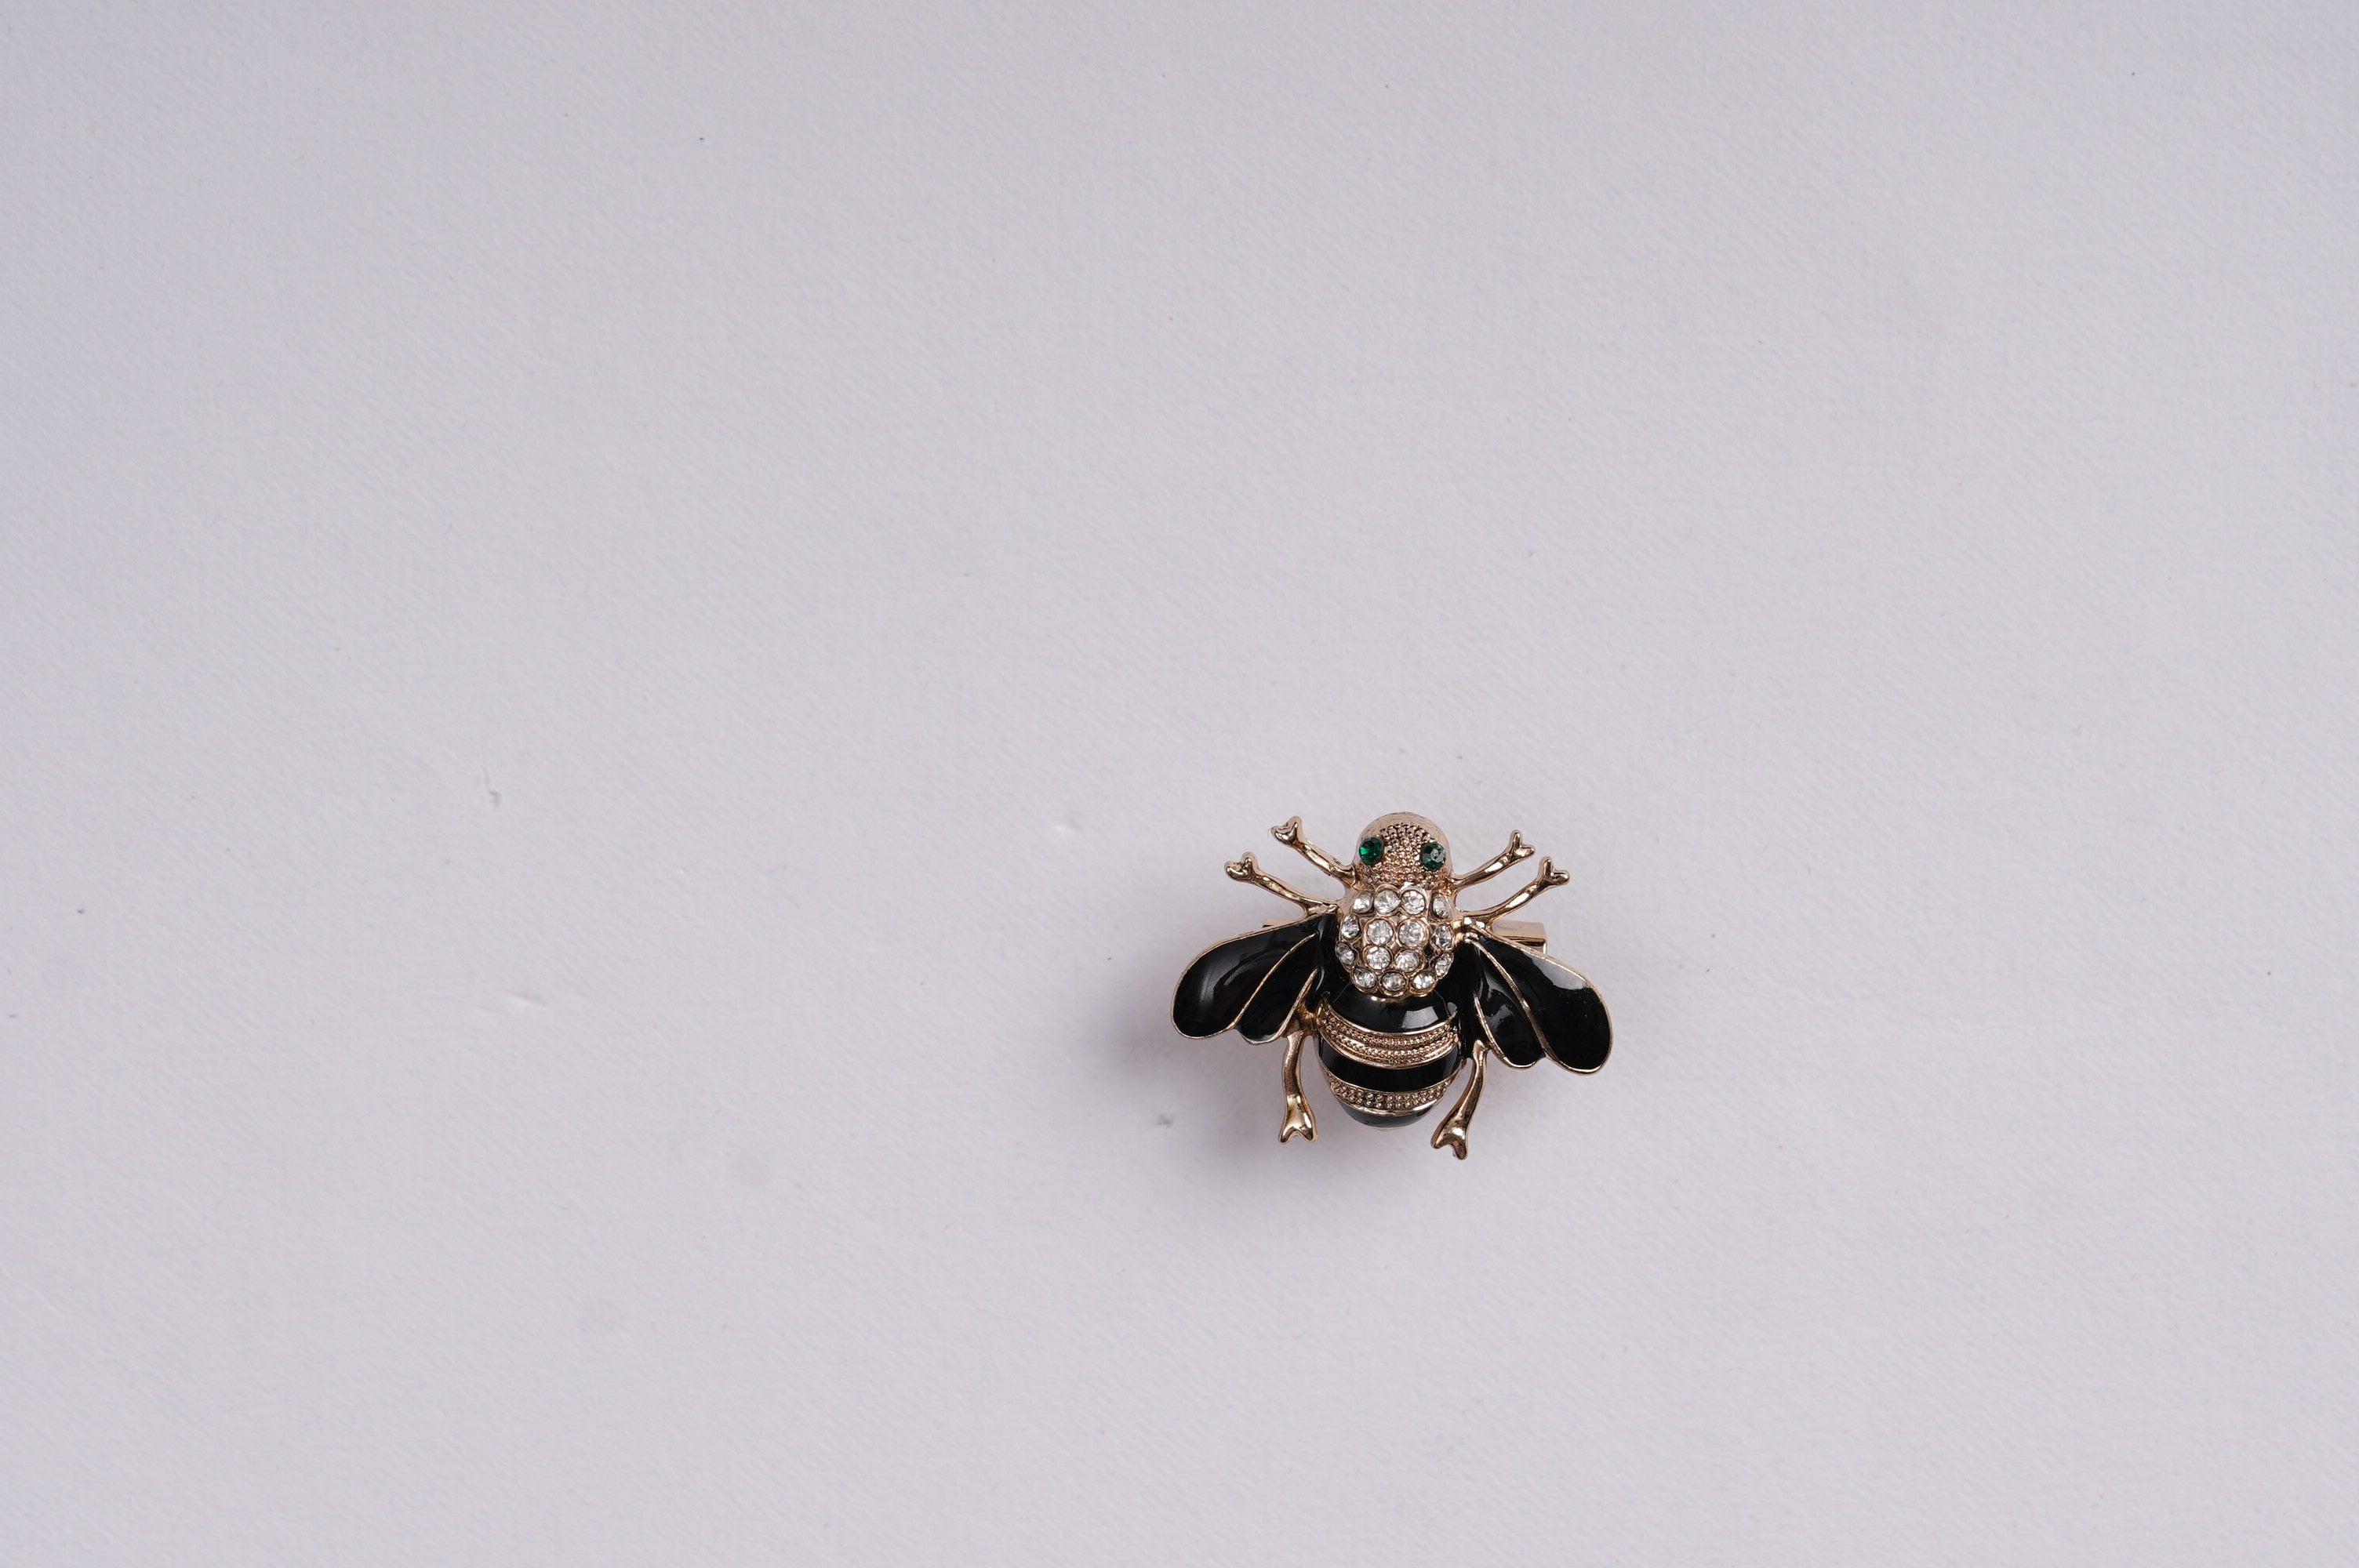 STUNNING BLACK & GOLD BEE INSECT BROOCH PIN